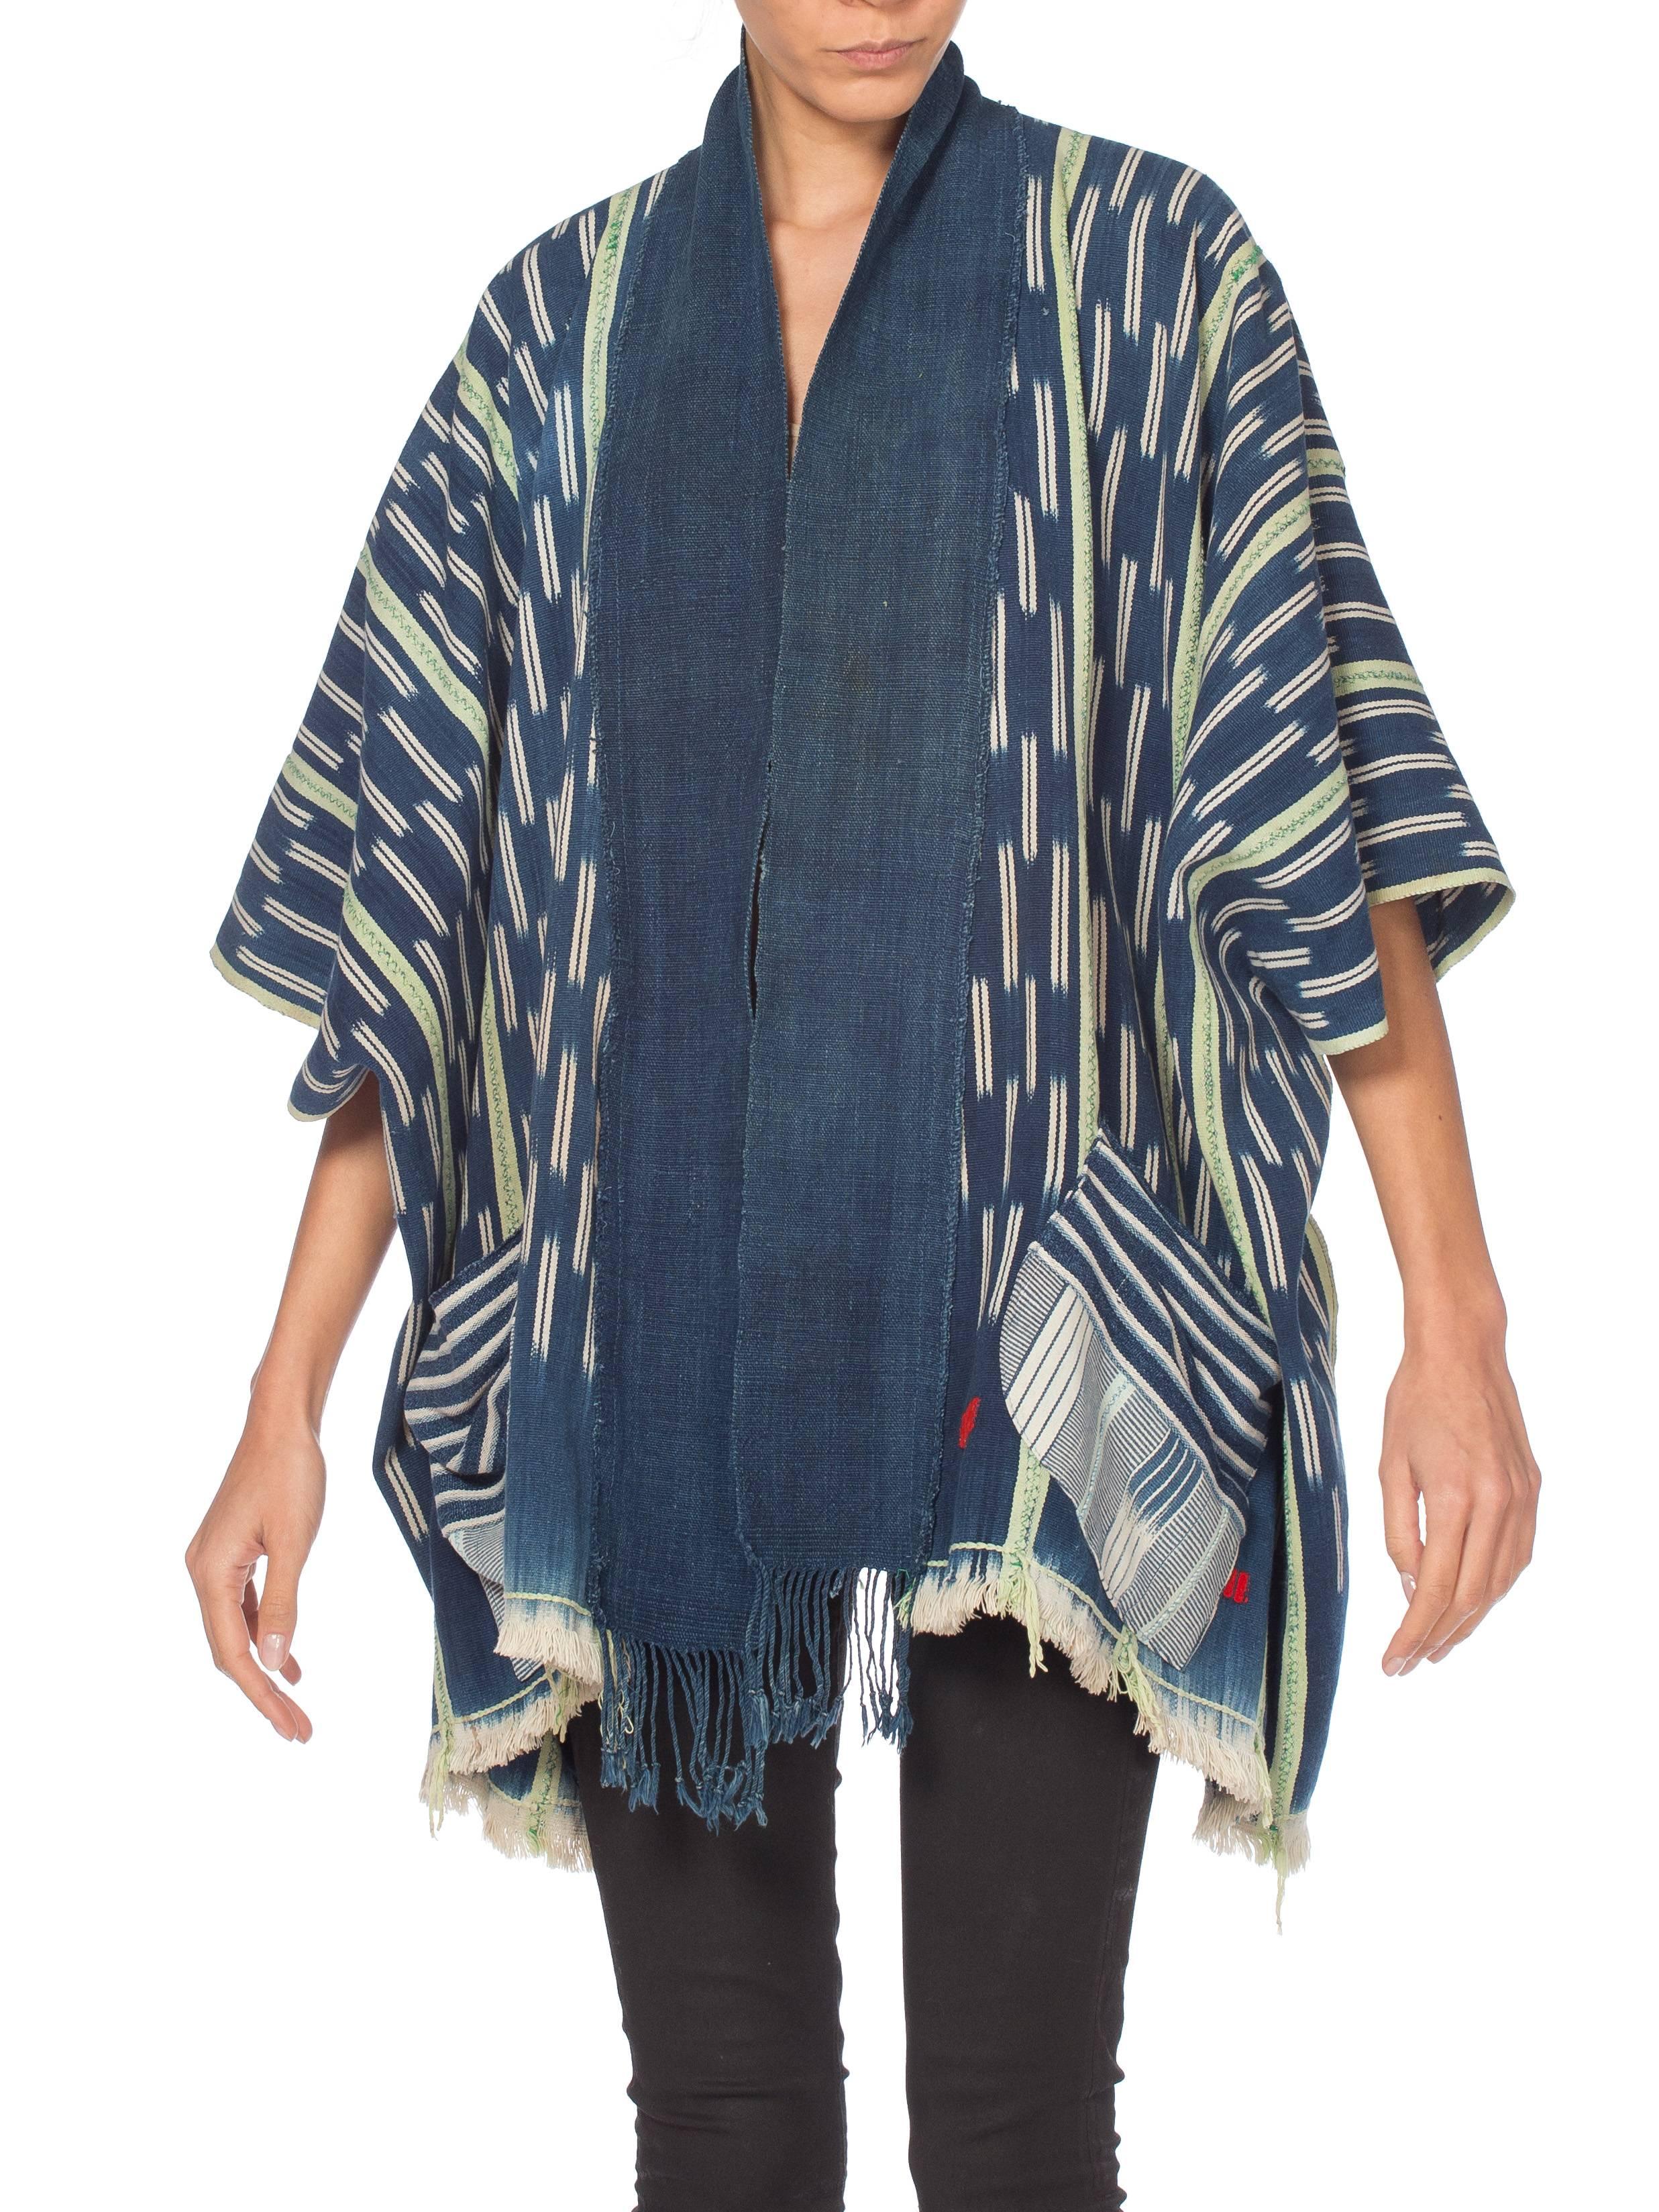 MORPHEW COLLECTION Indigo Blue & Green Cotton Handwoven African Oversized Ponch 3